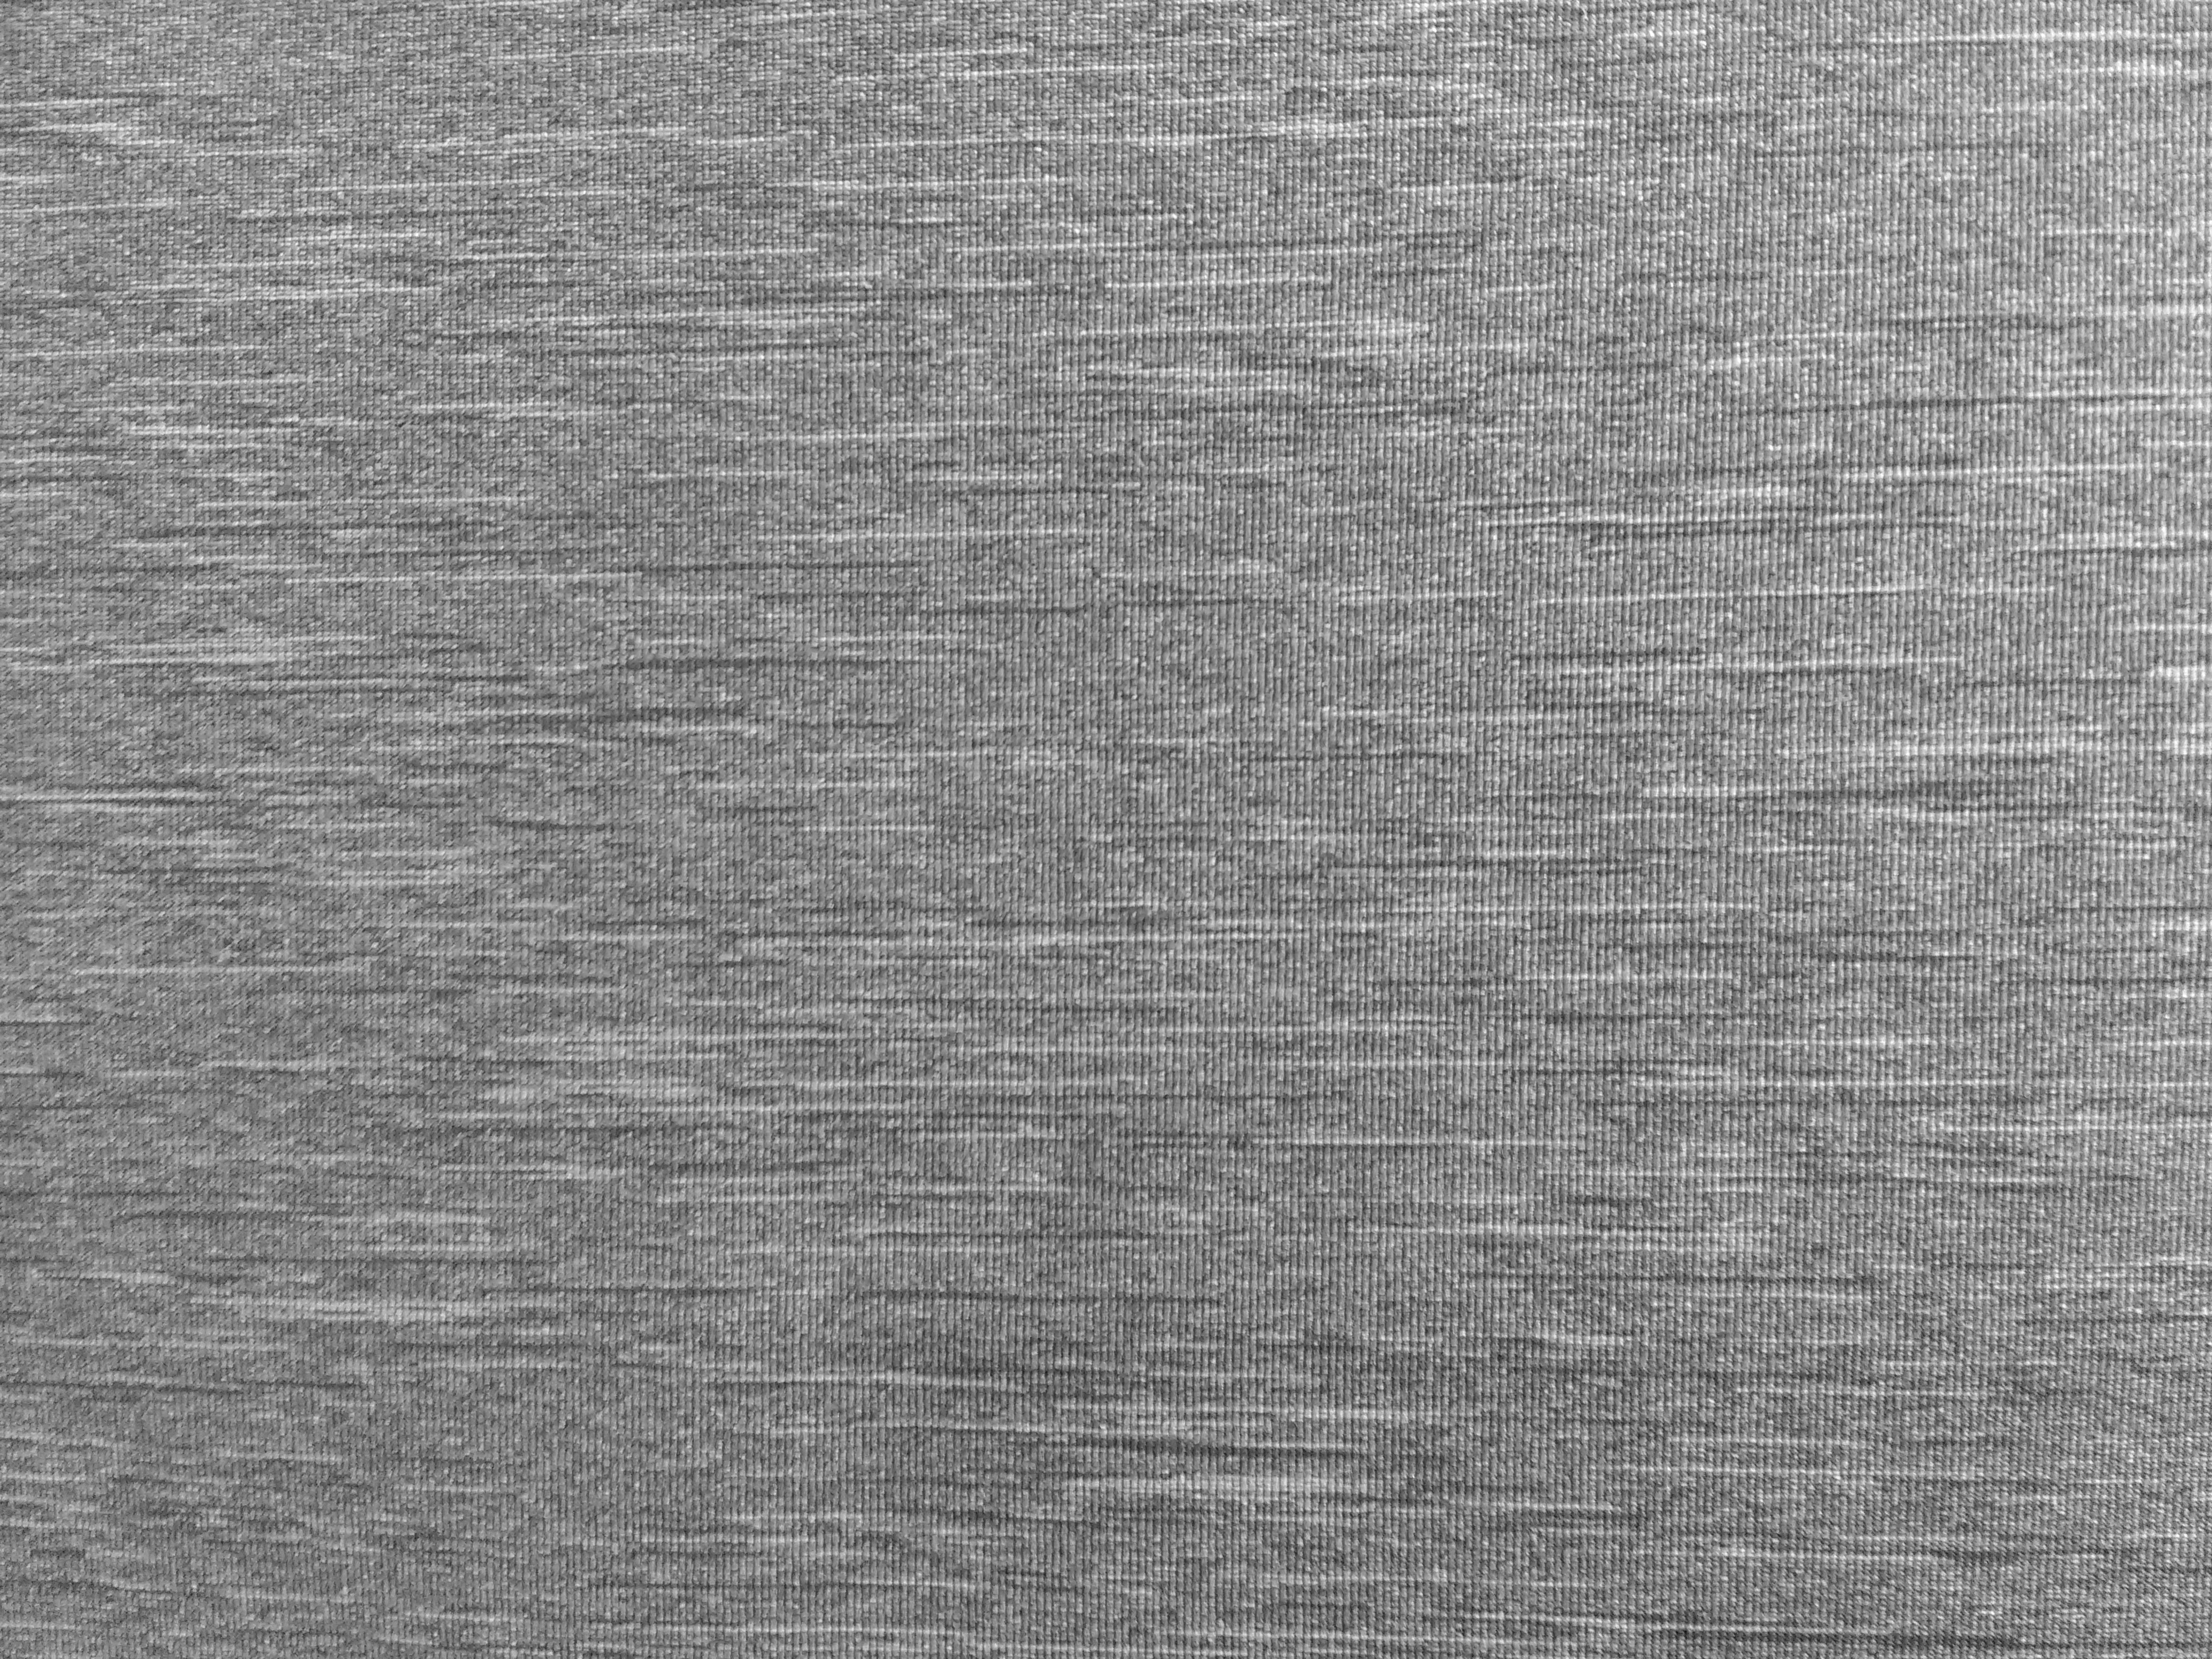 Gray Variegated Knit Fabric Texture Picture